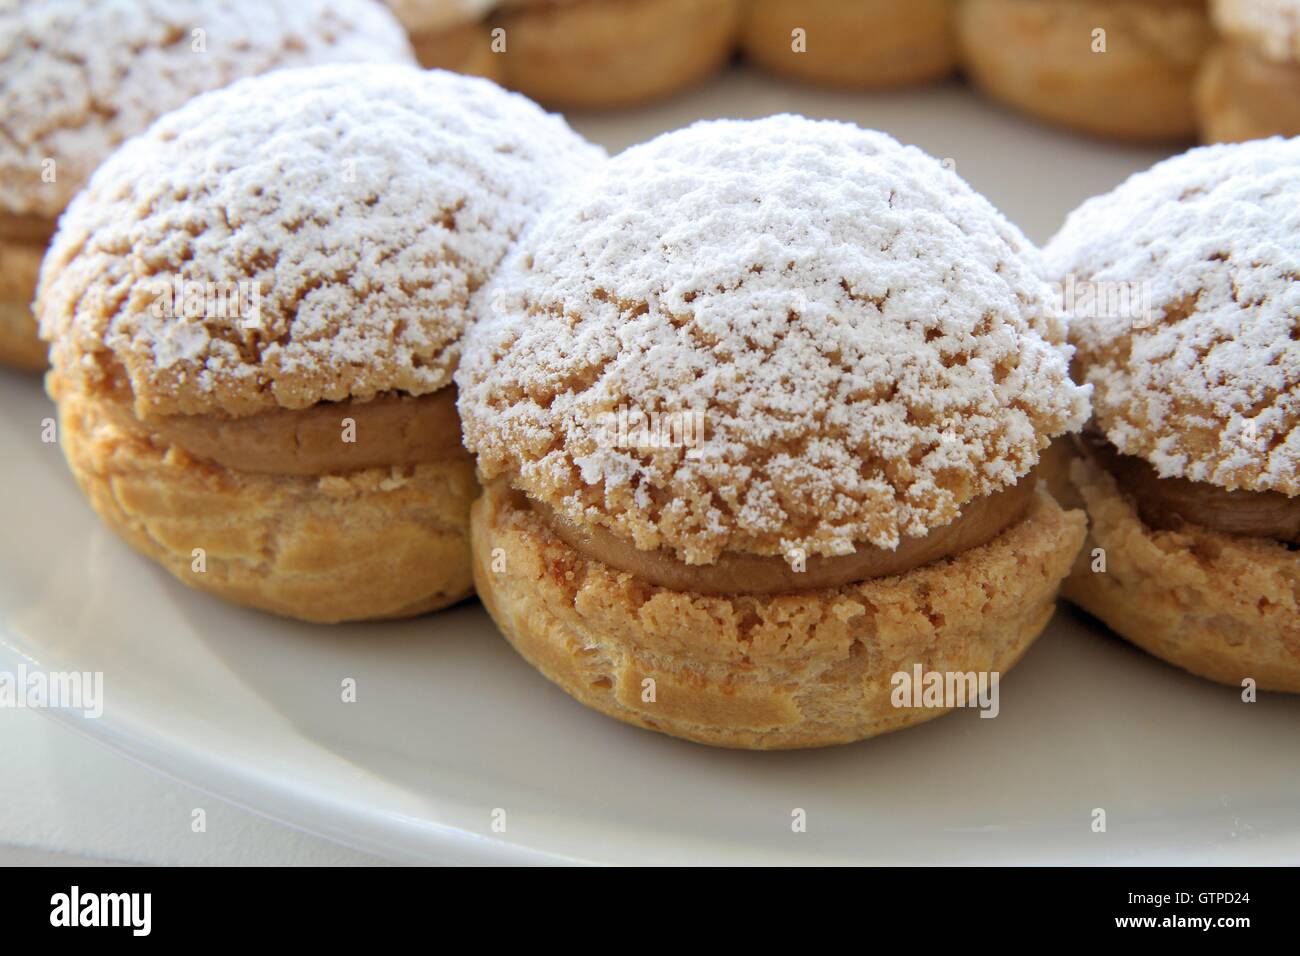 Paris Brest french pastry Stock Photo